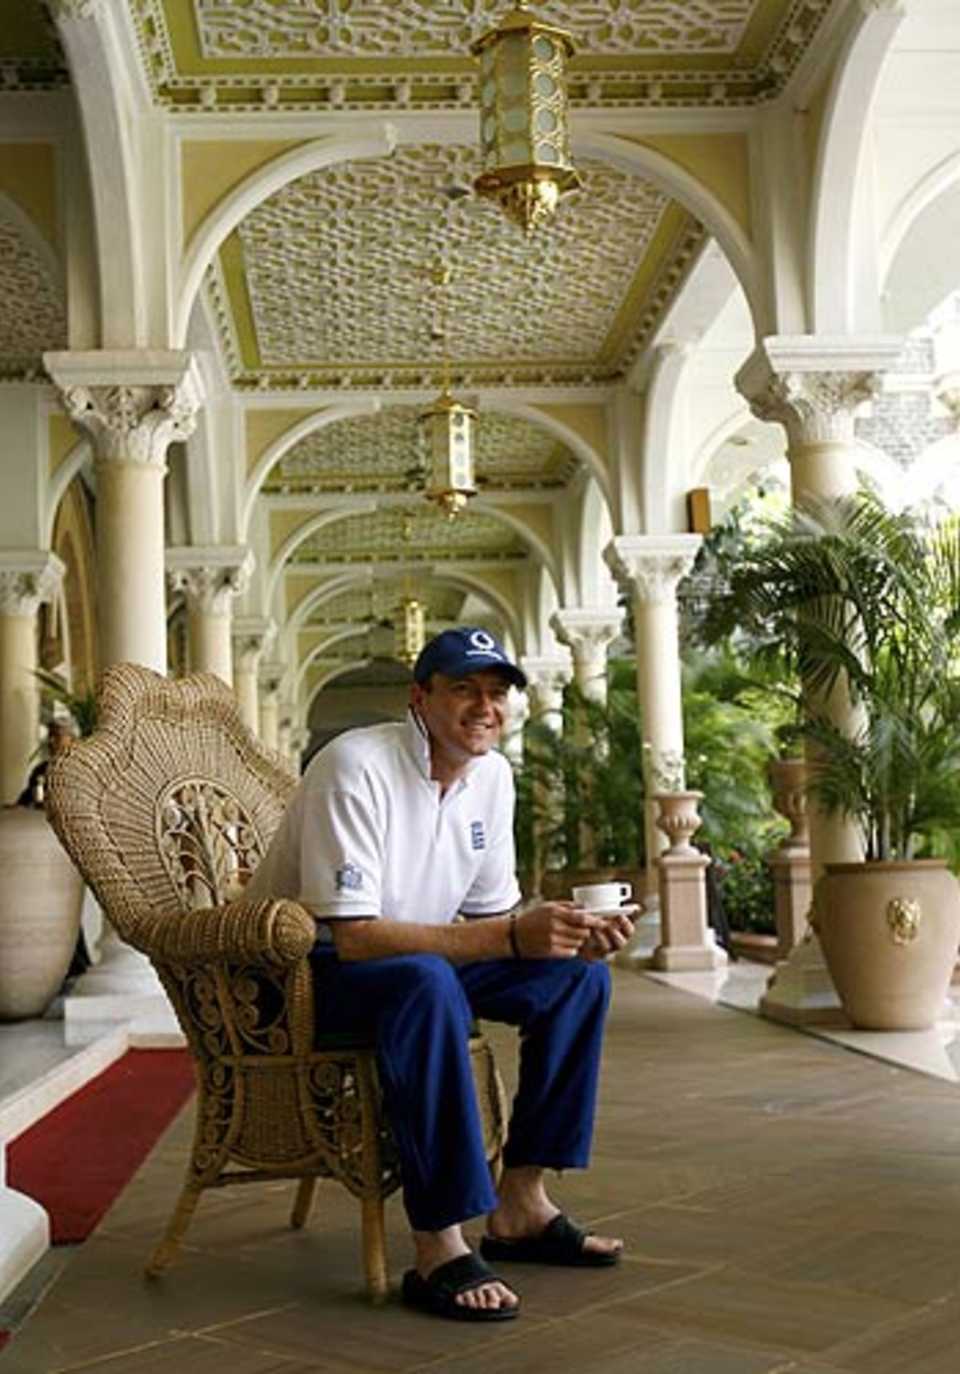 Shaun Udal relaxes with a cup of coffee at the team hotel, Mumbai, March 23 2006